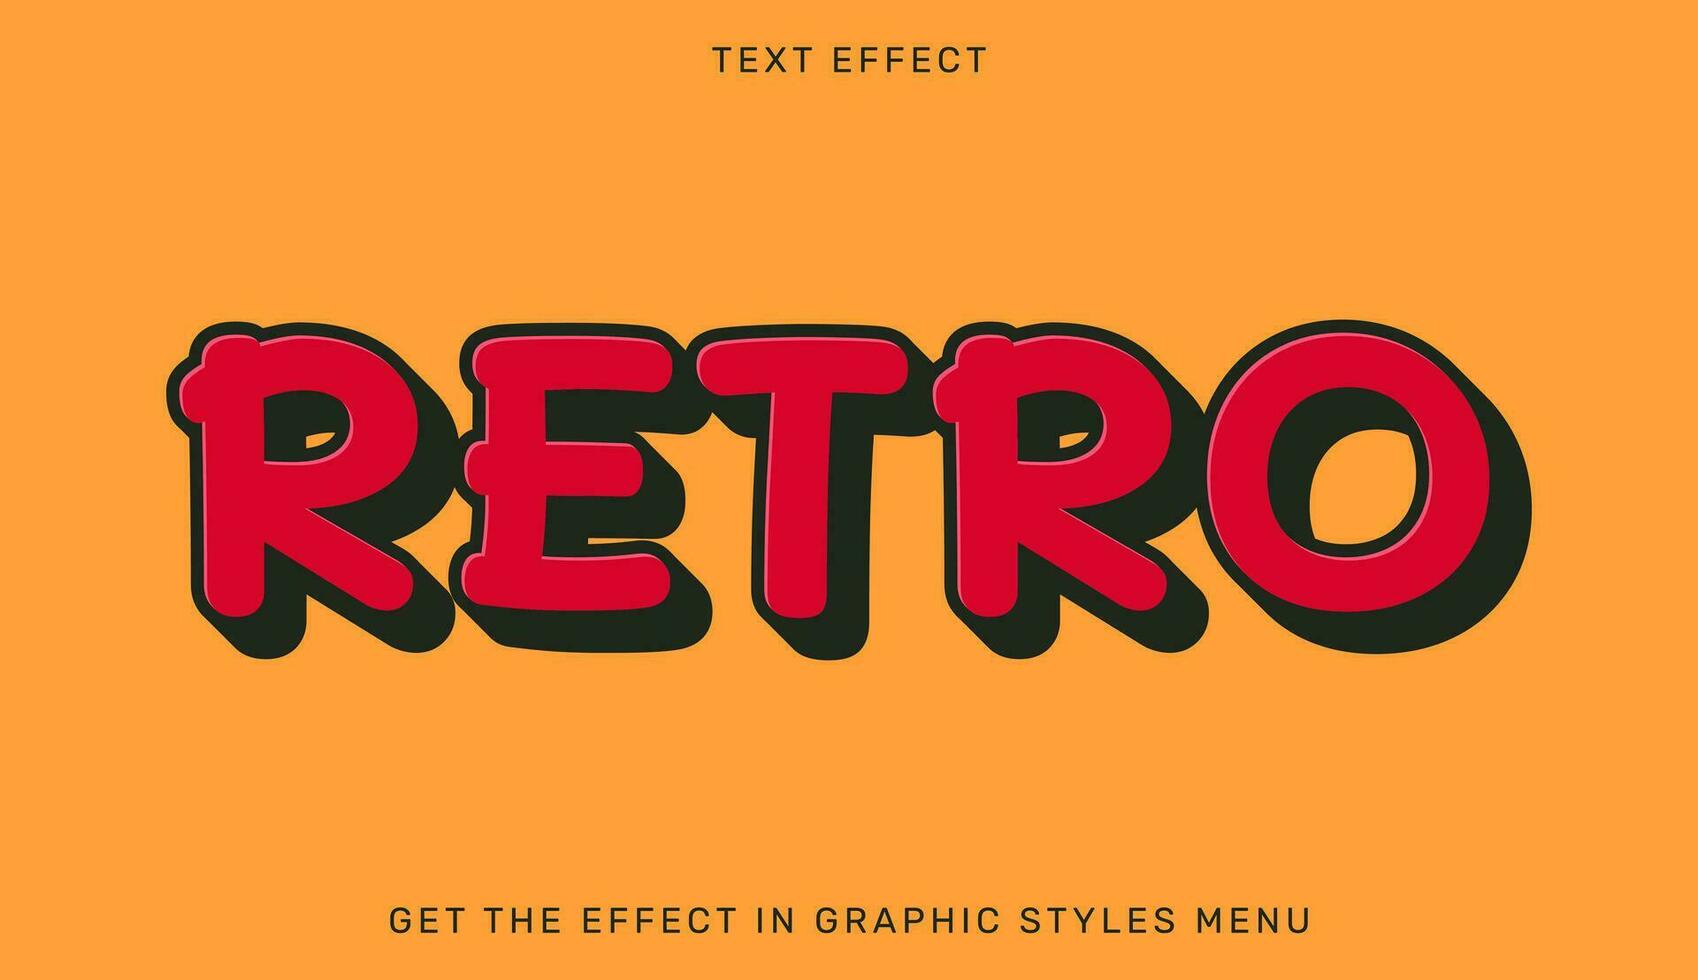 Retro editable text effect in 3d style. Text emblem for advertising, branding and business logo vector